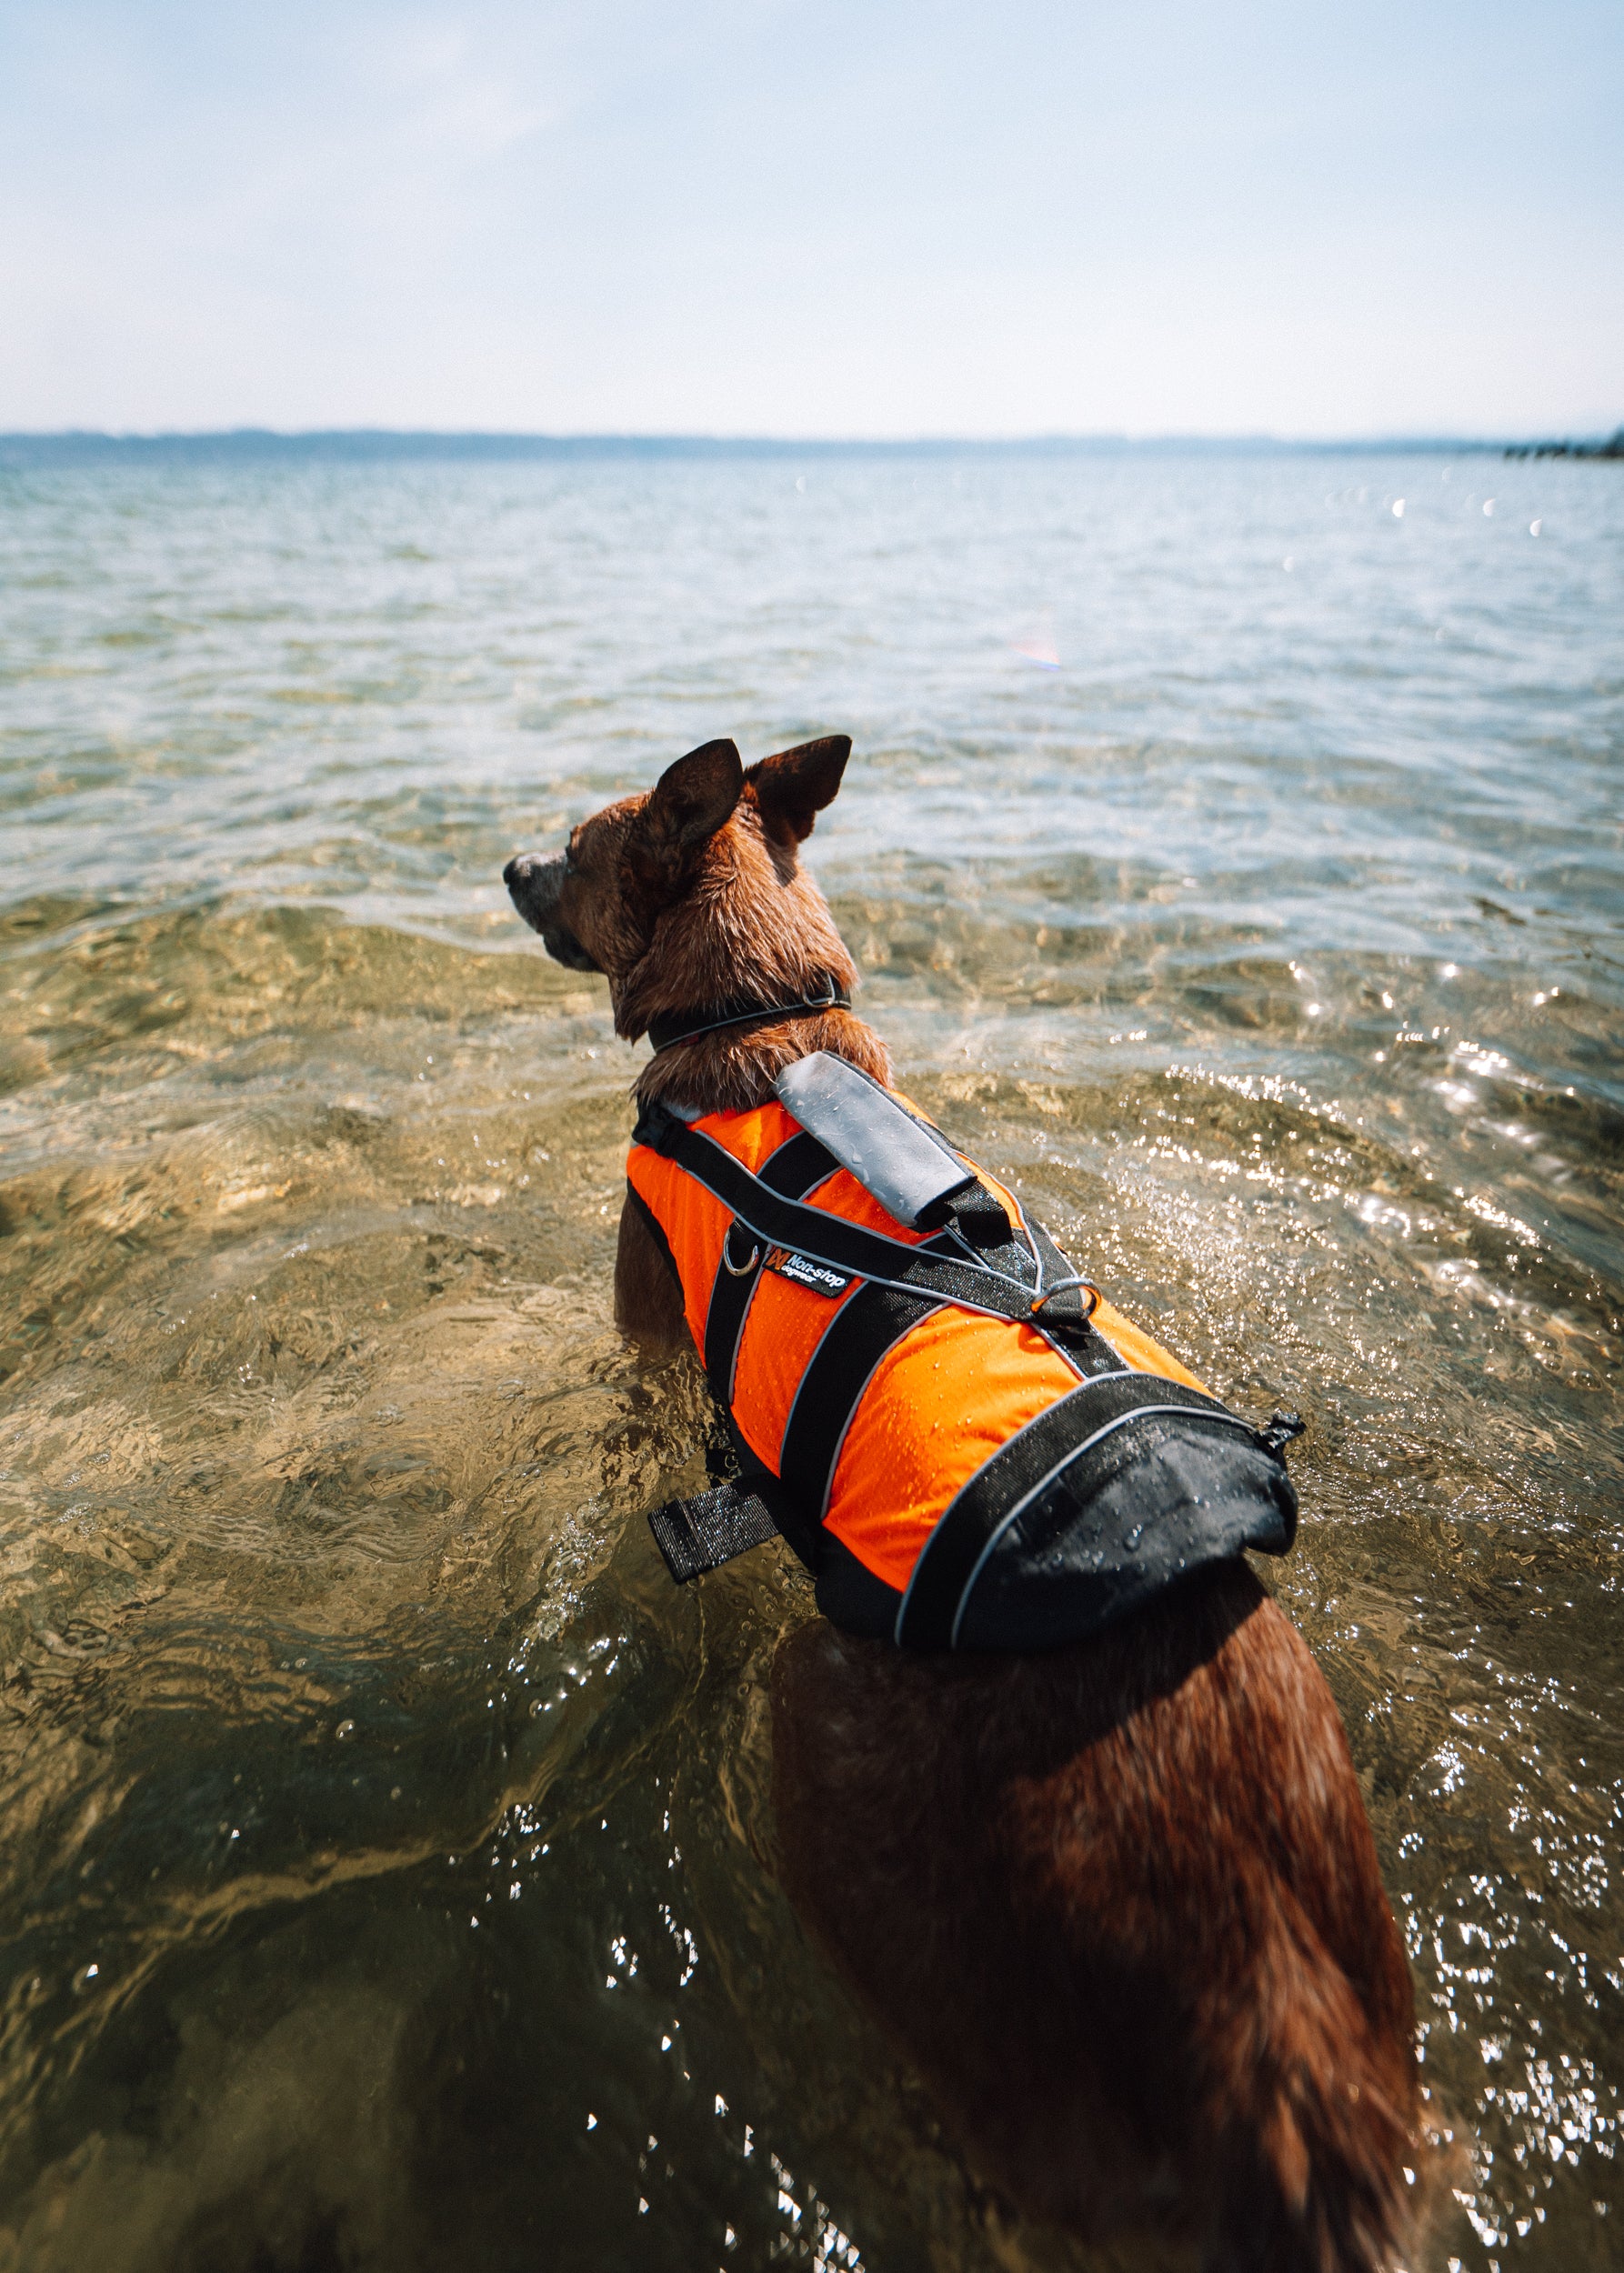 Non -stop dogwear Life Jacket 2.0 - Life Jacket for Dogs